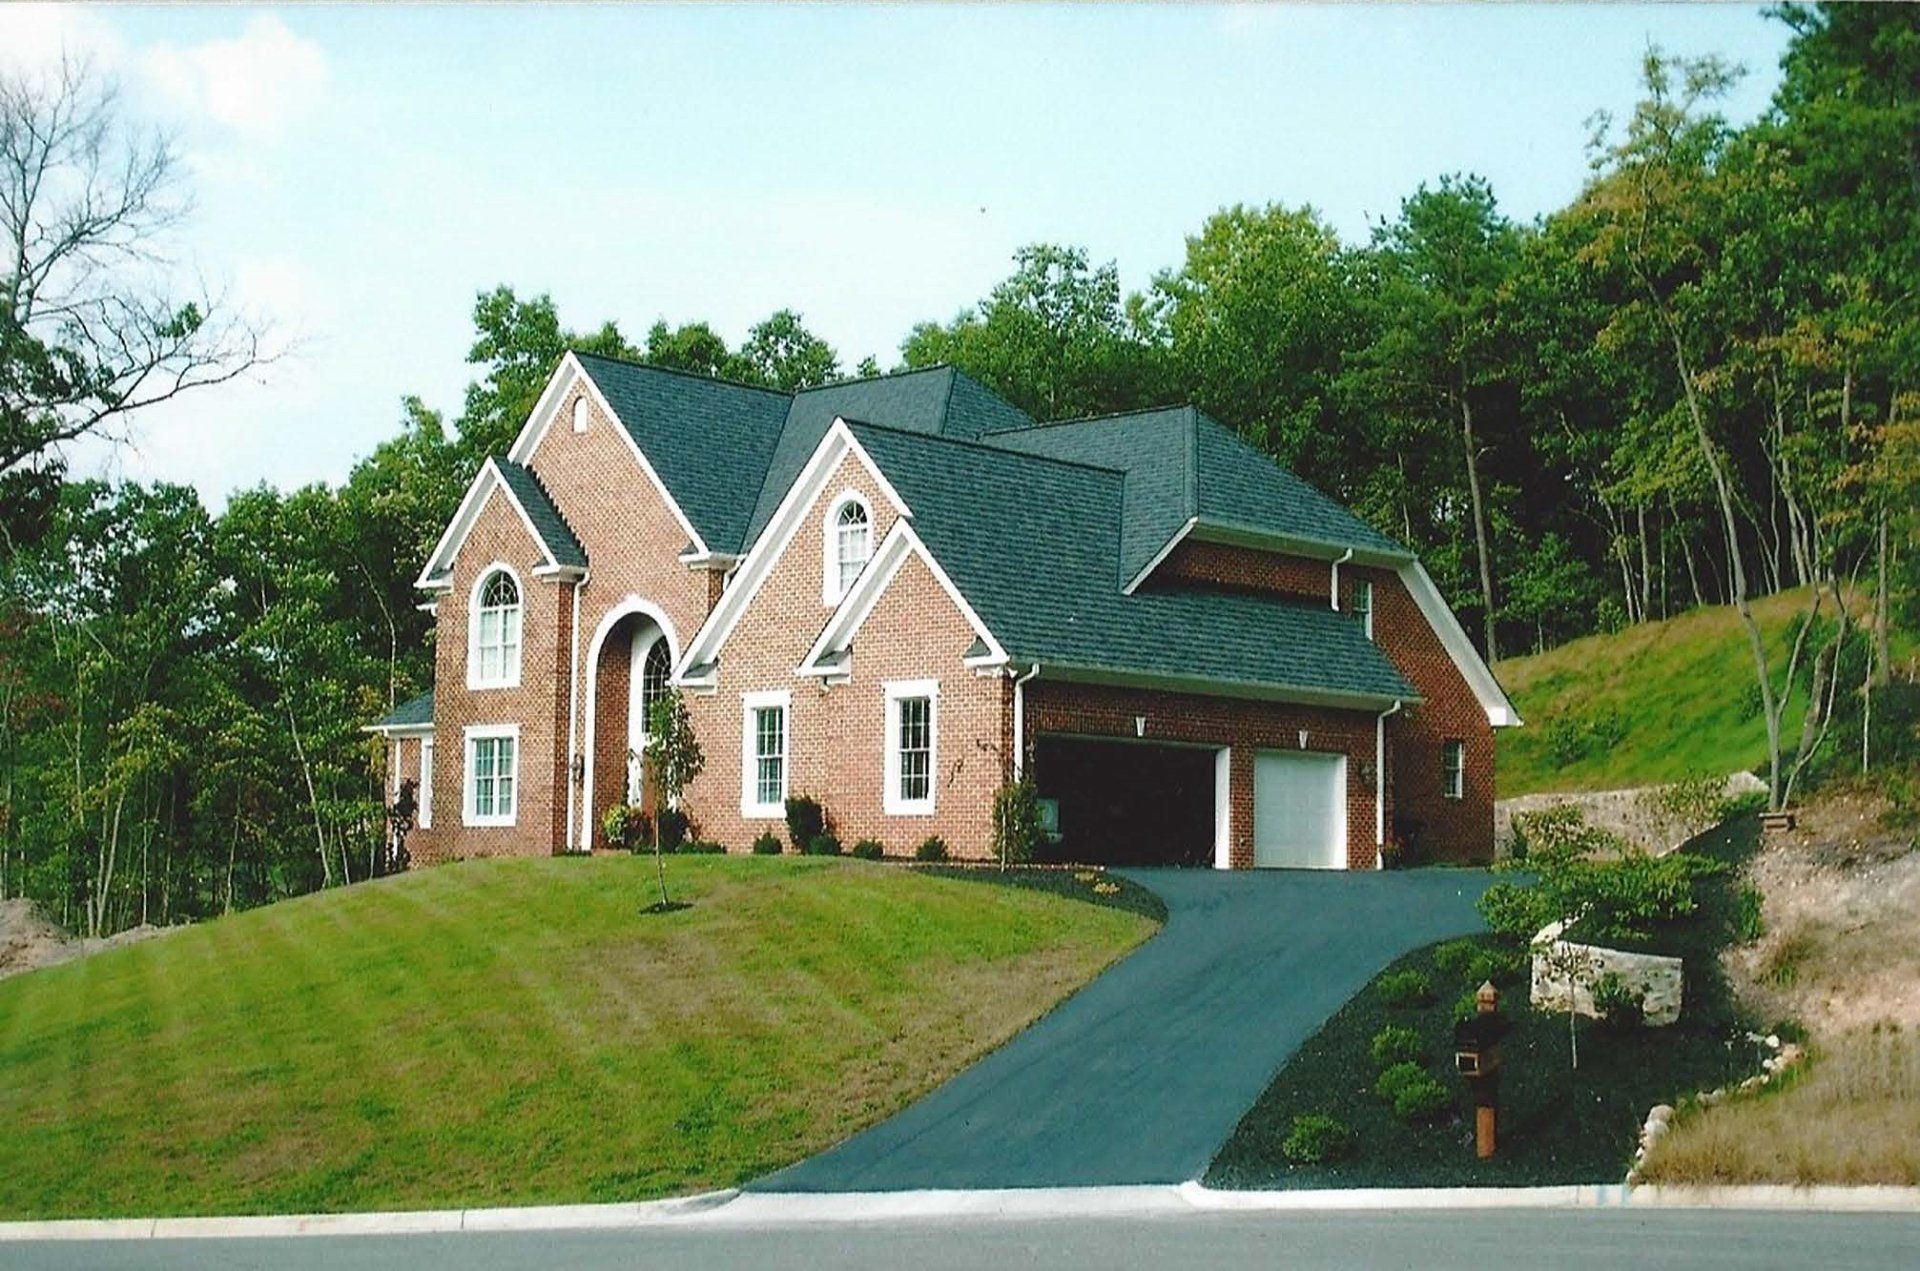 Large House With Green Roof — Rocky Mount, VA — Lozeau Construction Inc